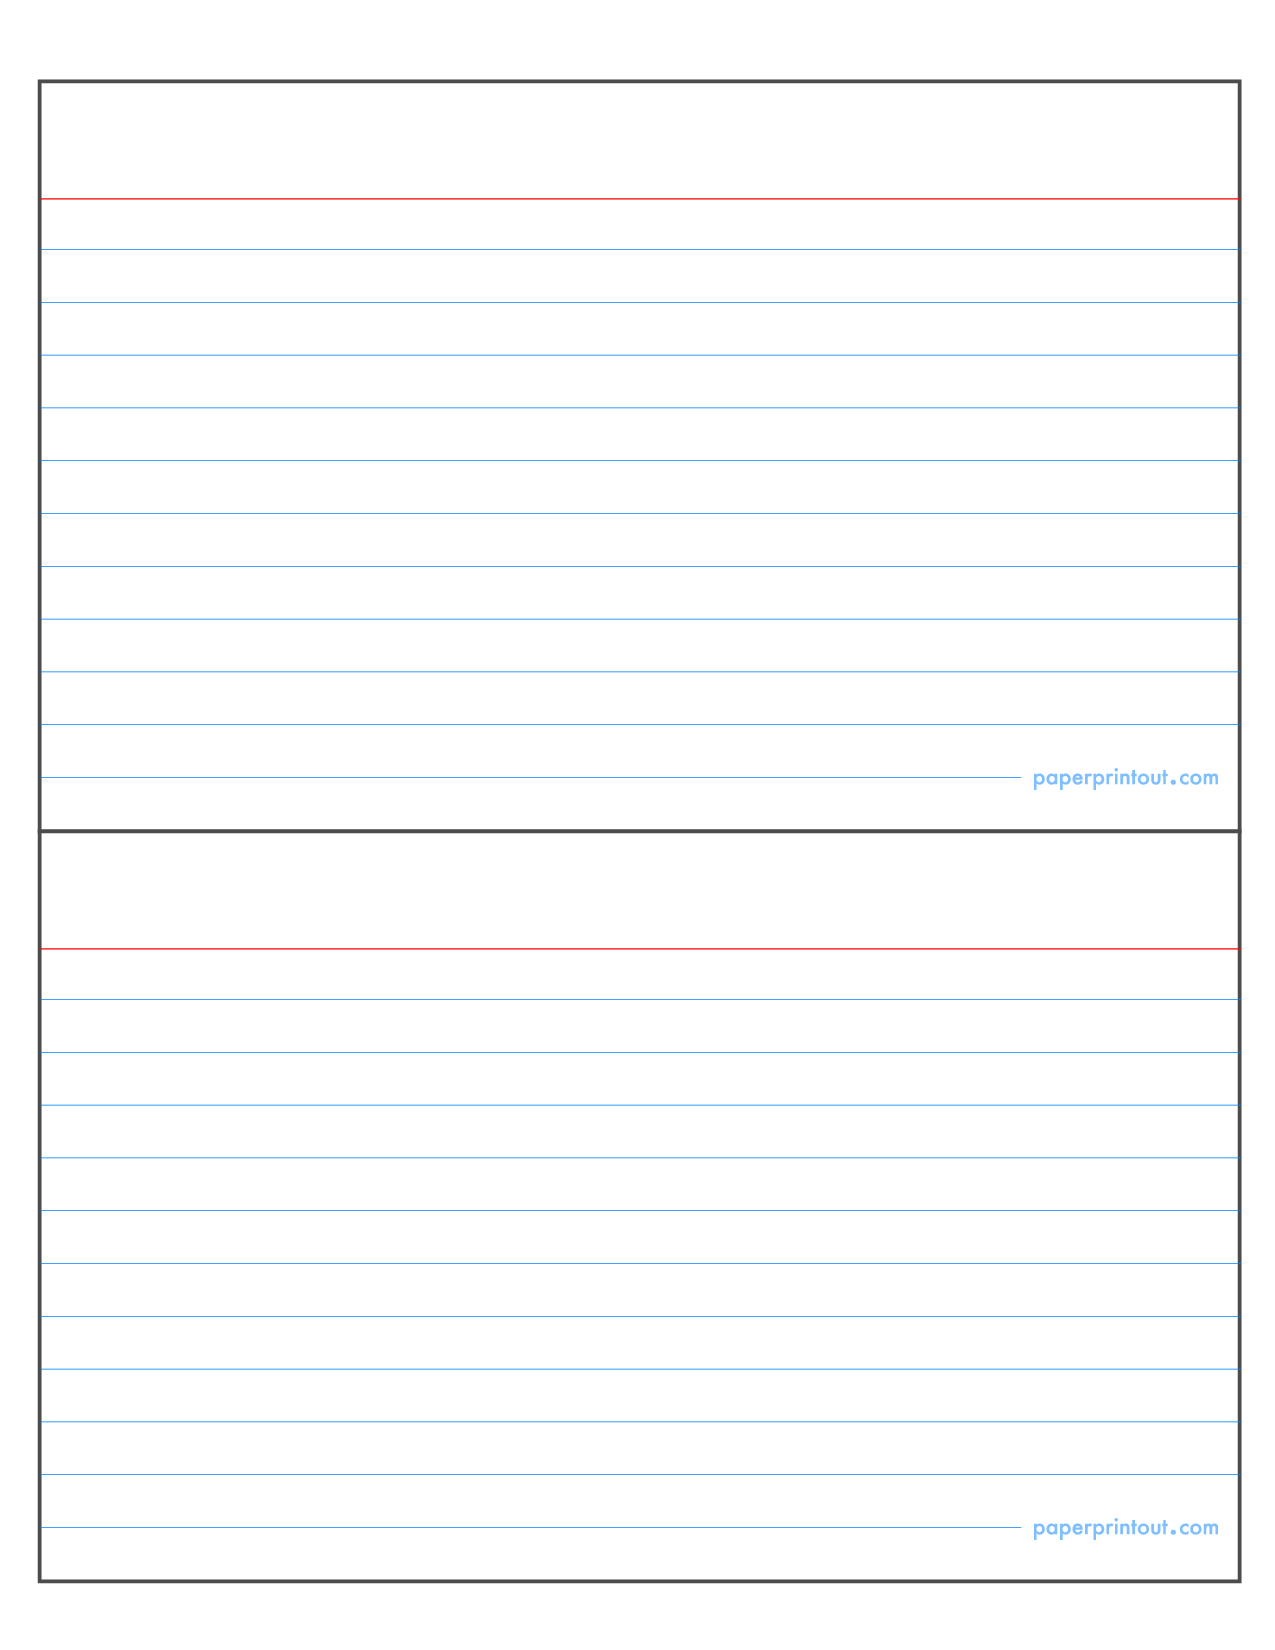 Index Card Template | E Commercewordpress Inside 5 By 8 Index Card Template